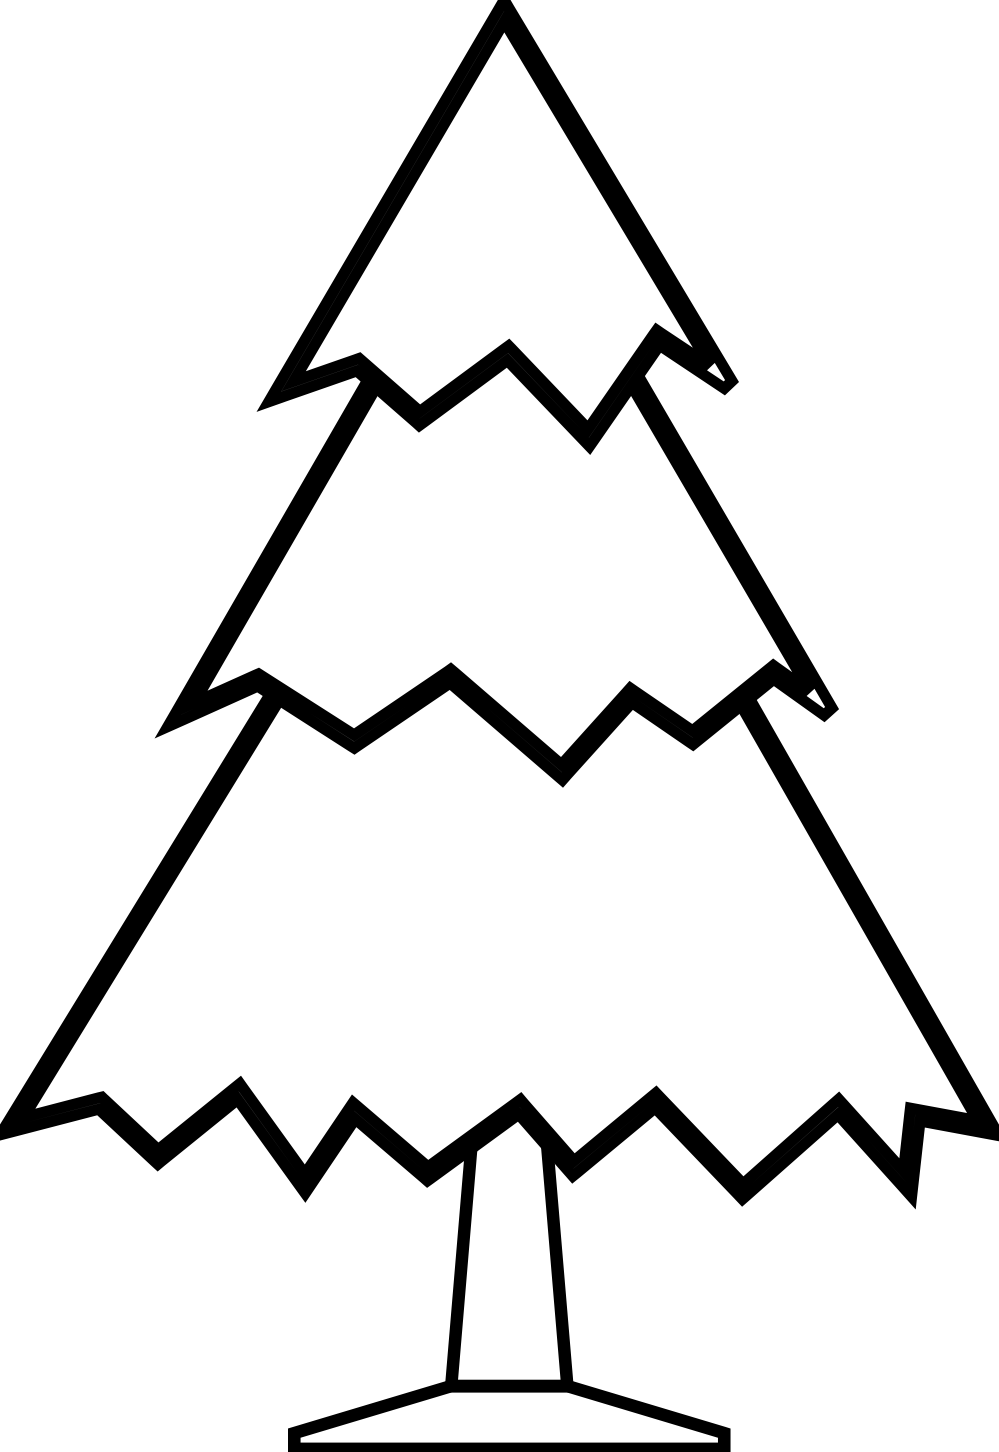 Tree Clipart Black And White - ClipArt Best